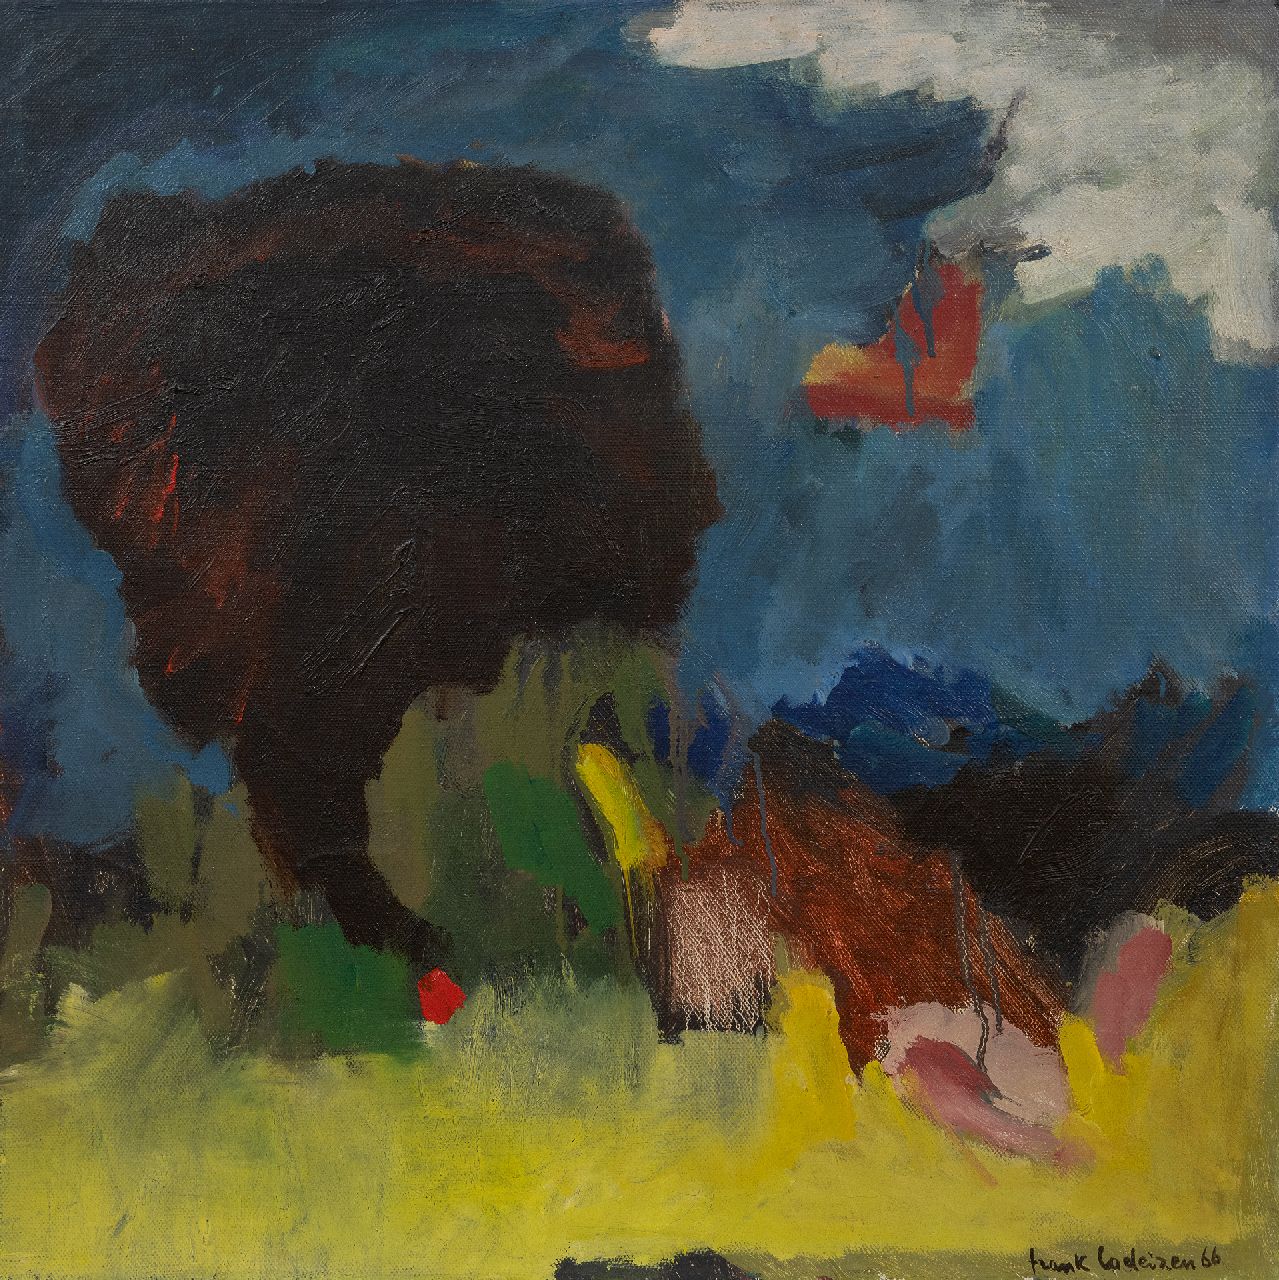 Lodeizen F.  | Frank Lodeizen | Paintings offered for sale | Landscape, oil on canvas 60.0 x 60.0 cm, signed l.r. and dated '66